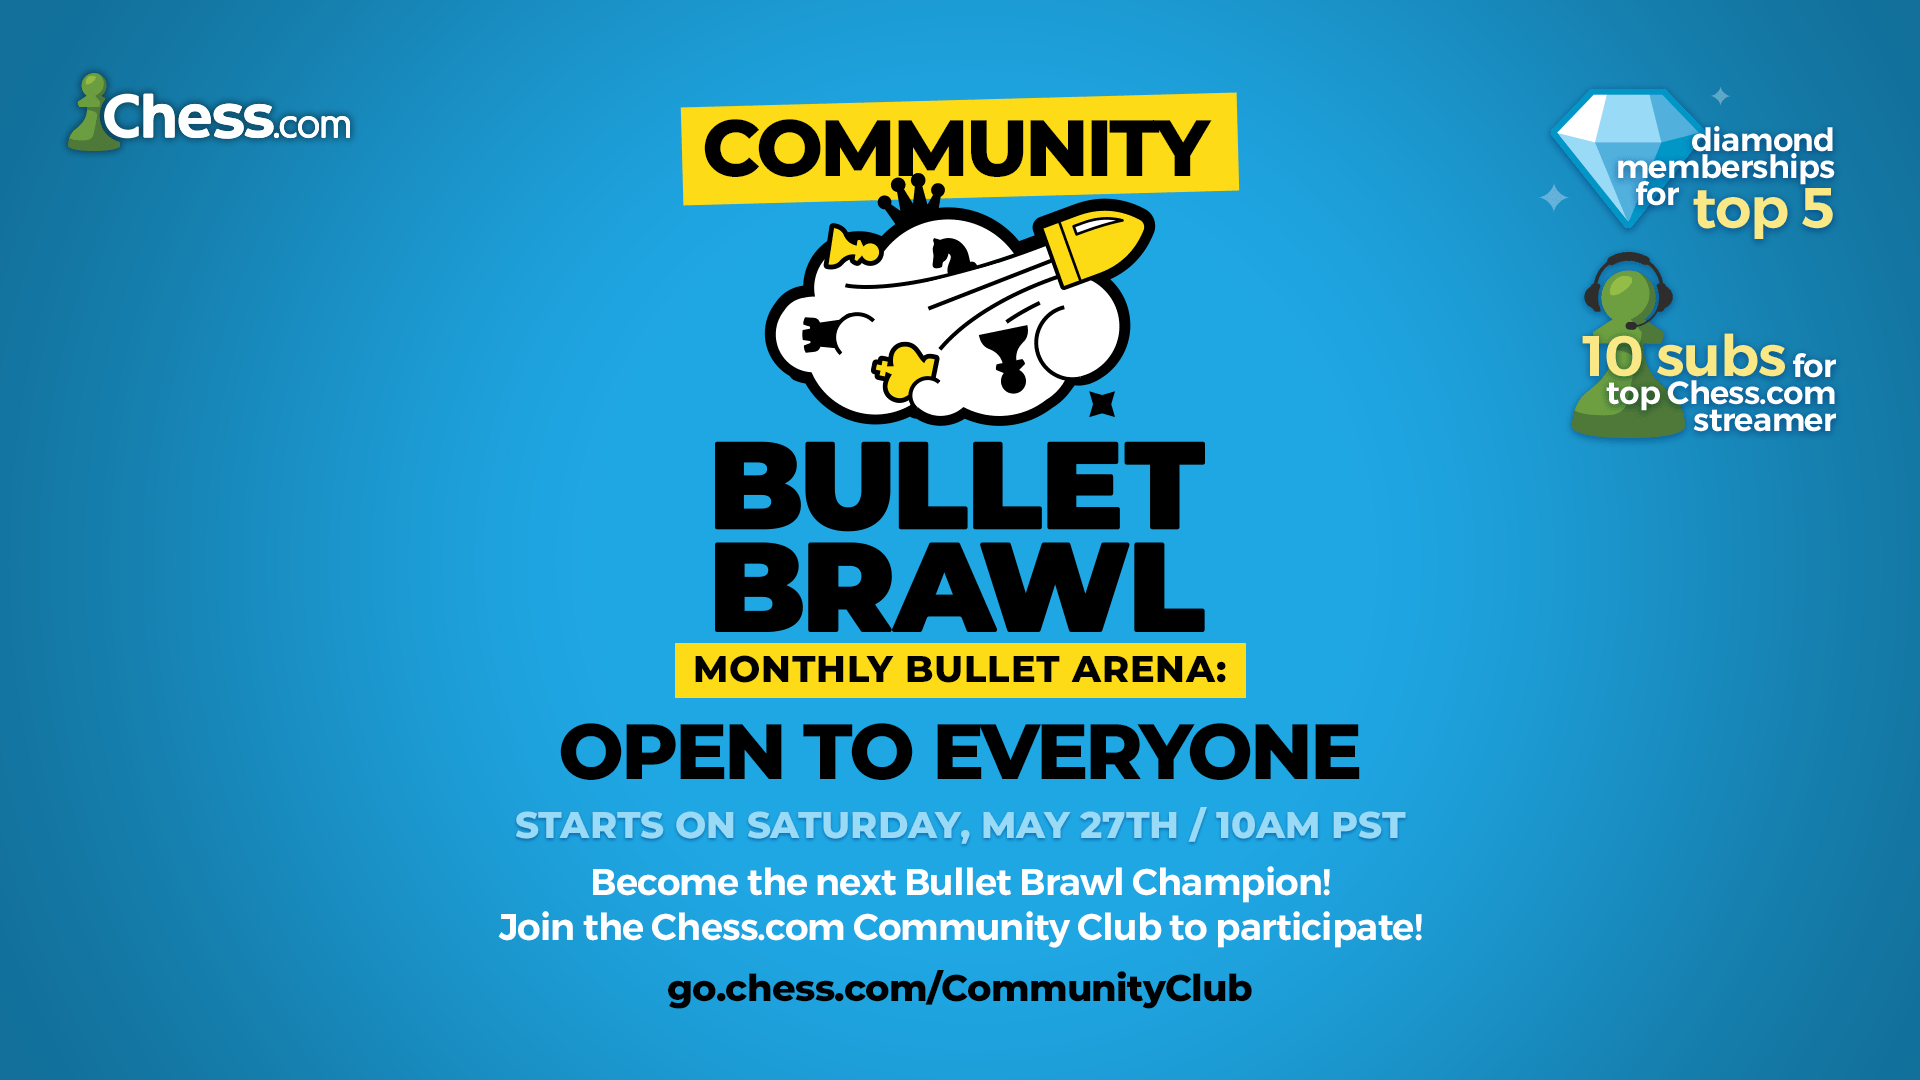 An image advertising Chess.com's Community Bullet Brawl event.